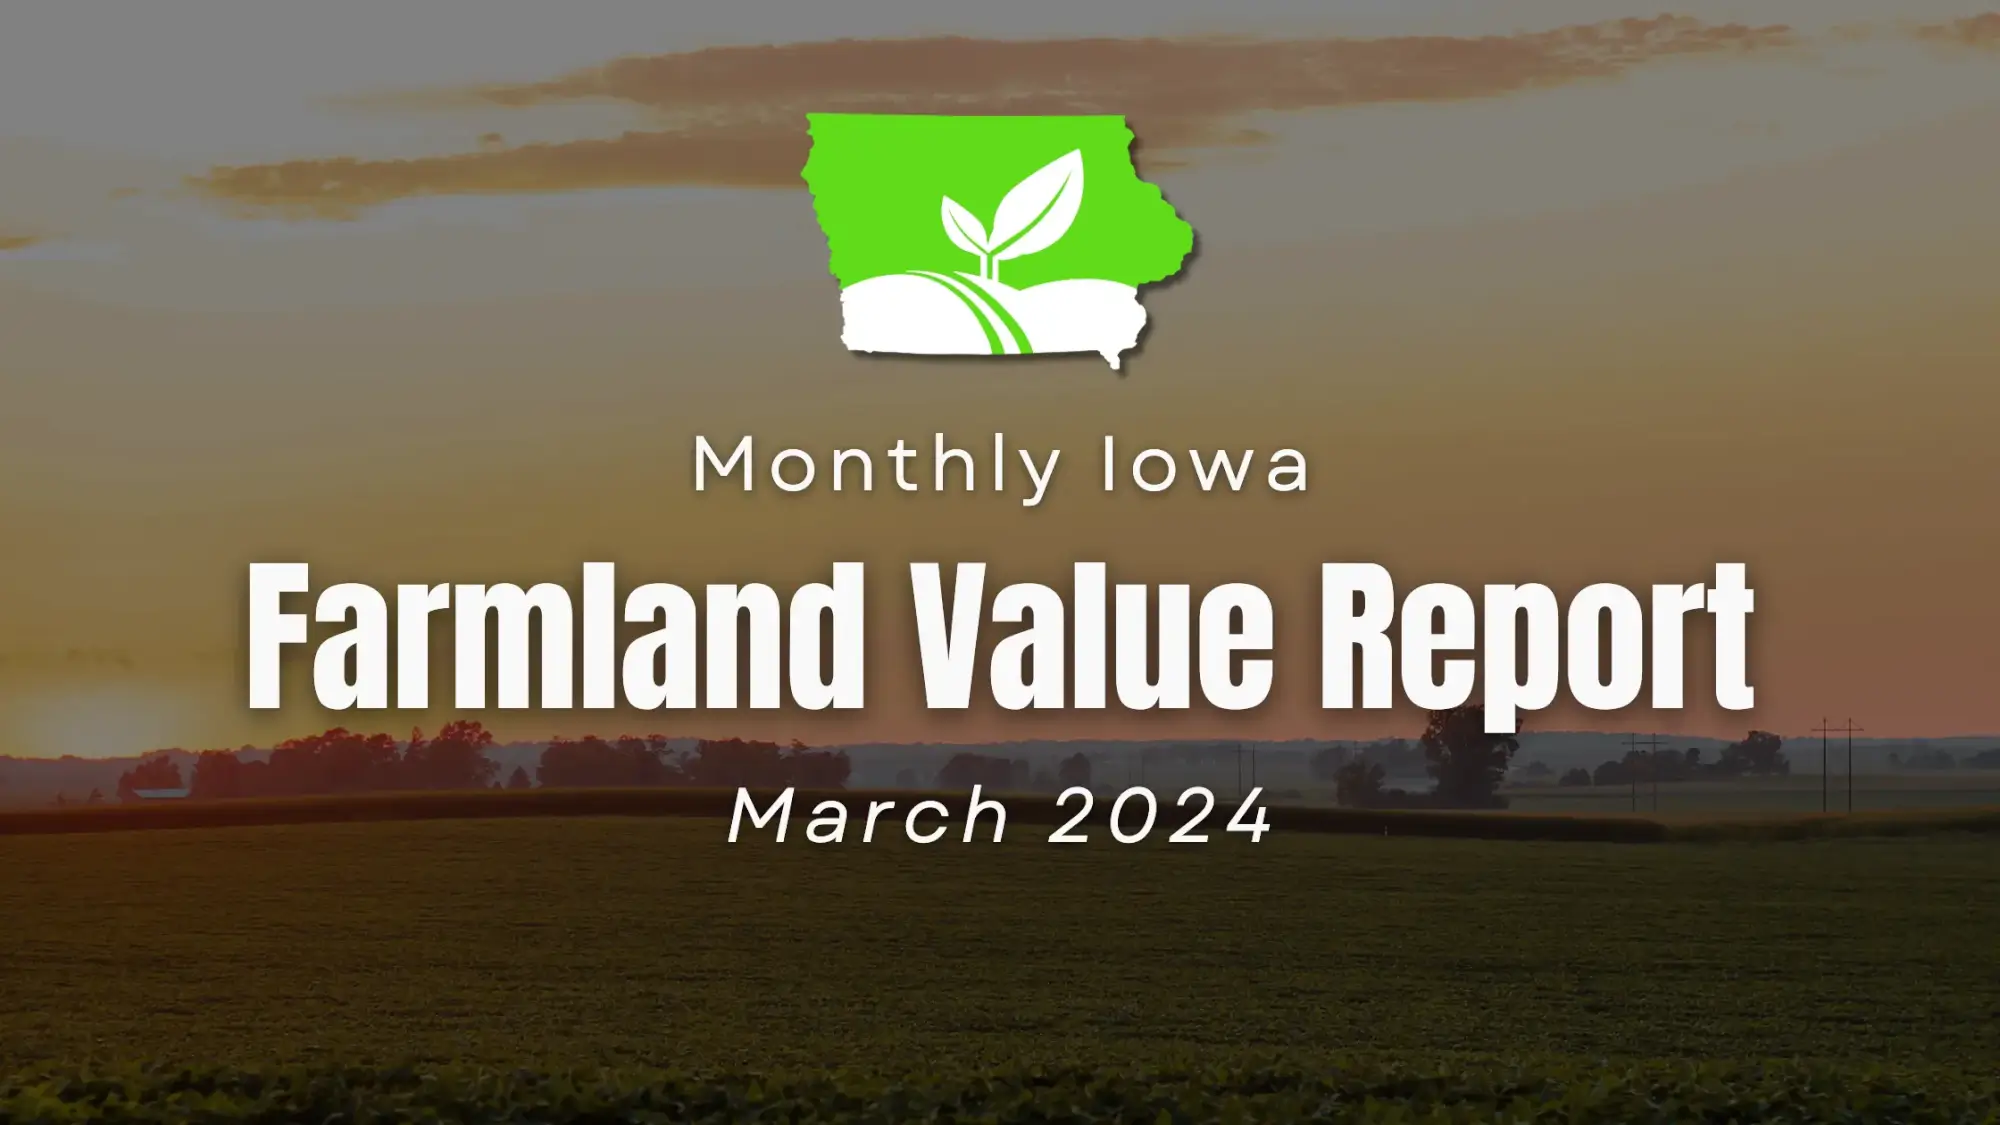 Monthly Iowa Farmland Value Report March 2024